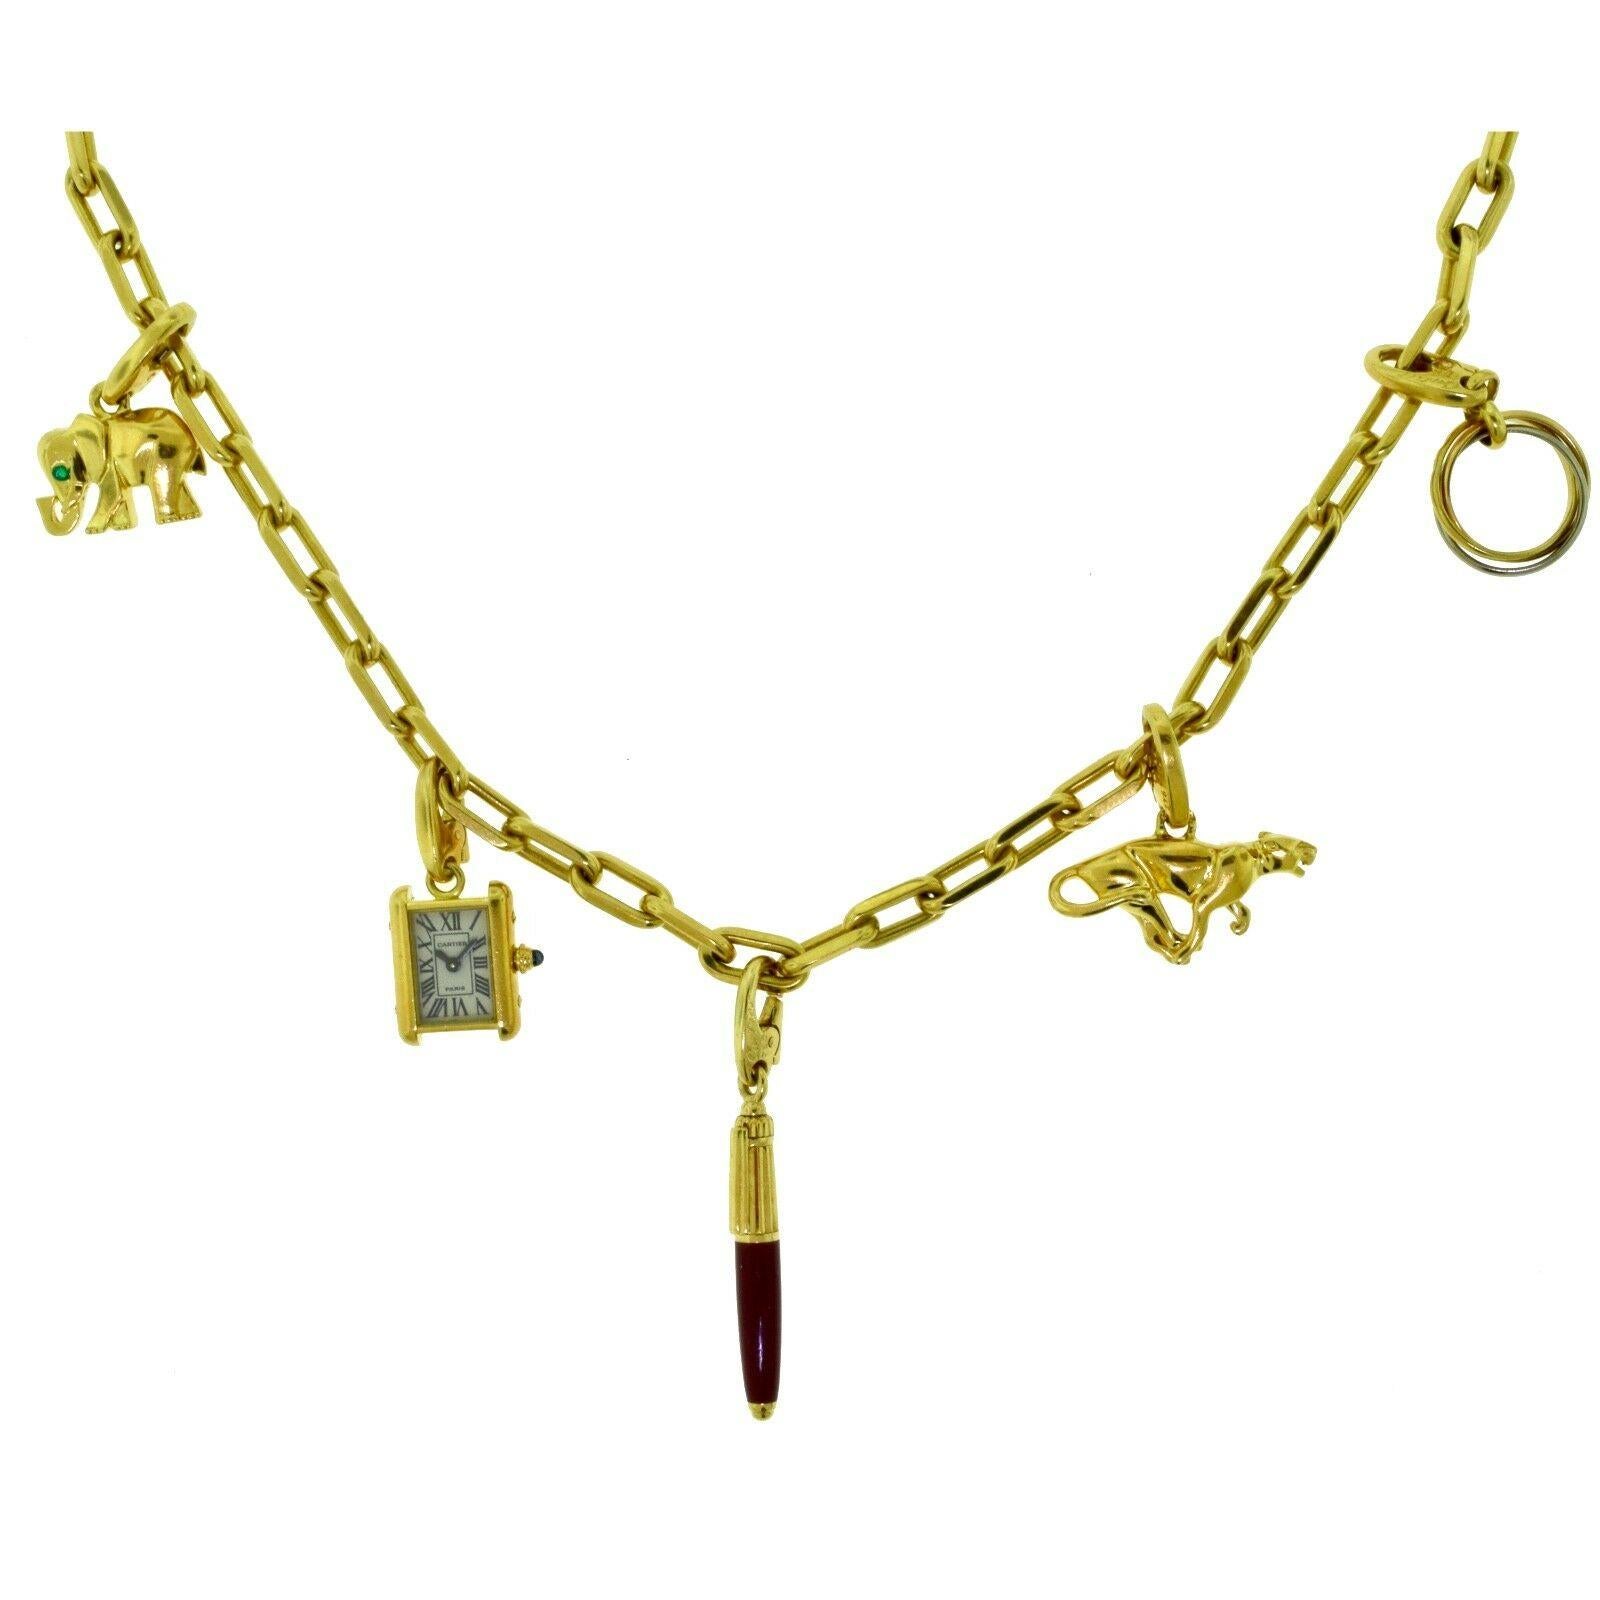 Brilliance Jewels, Miami
Questions? Call Us Anytime!
786,482,8100

Instantly recognizable Cartier charms on a gorgeous Yellow Gold Cartier Santos Chain. Charms are an elephant with emerald eye, Cartier Tank Francaise Watch, burgundy Pen, Running